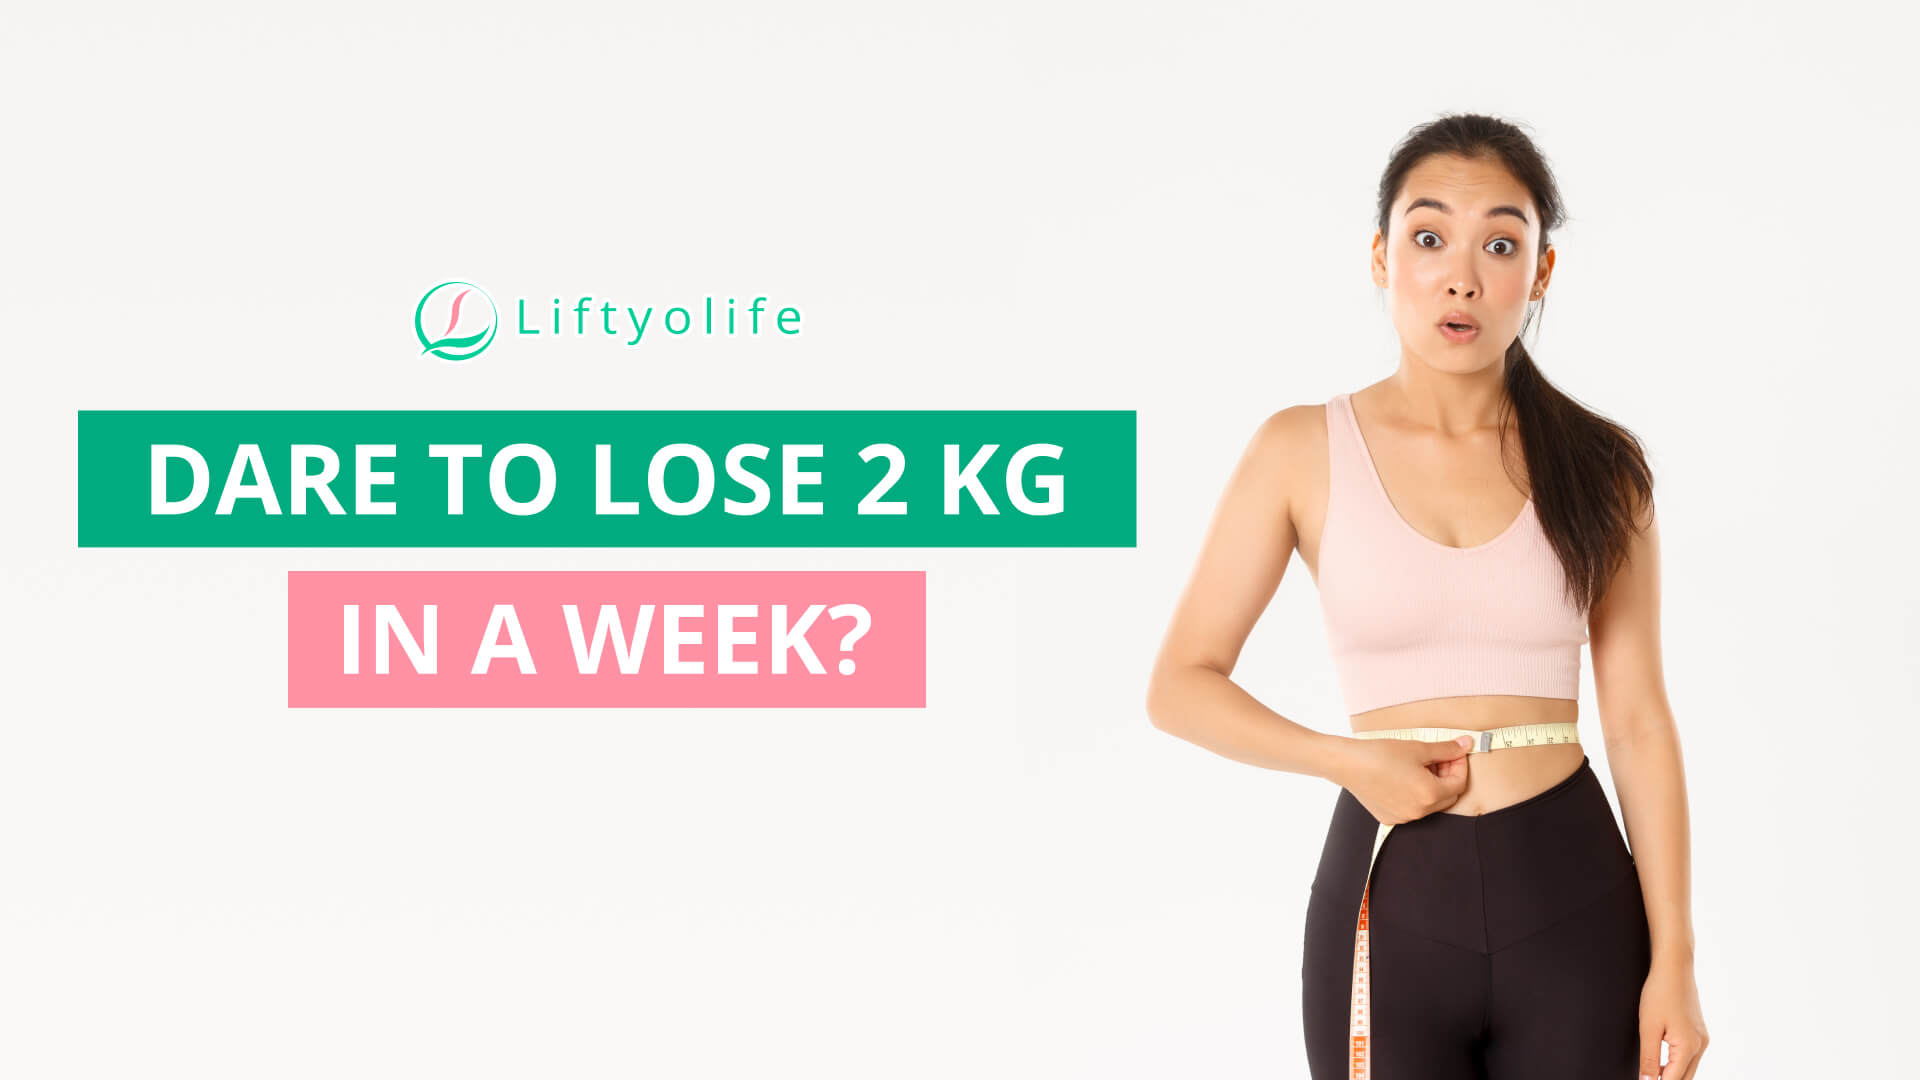 How To Lose 2 Kg In A Week - 20 Useful Tips | Liftyolife.com